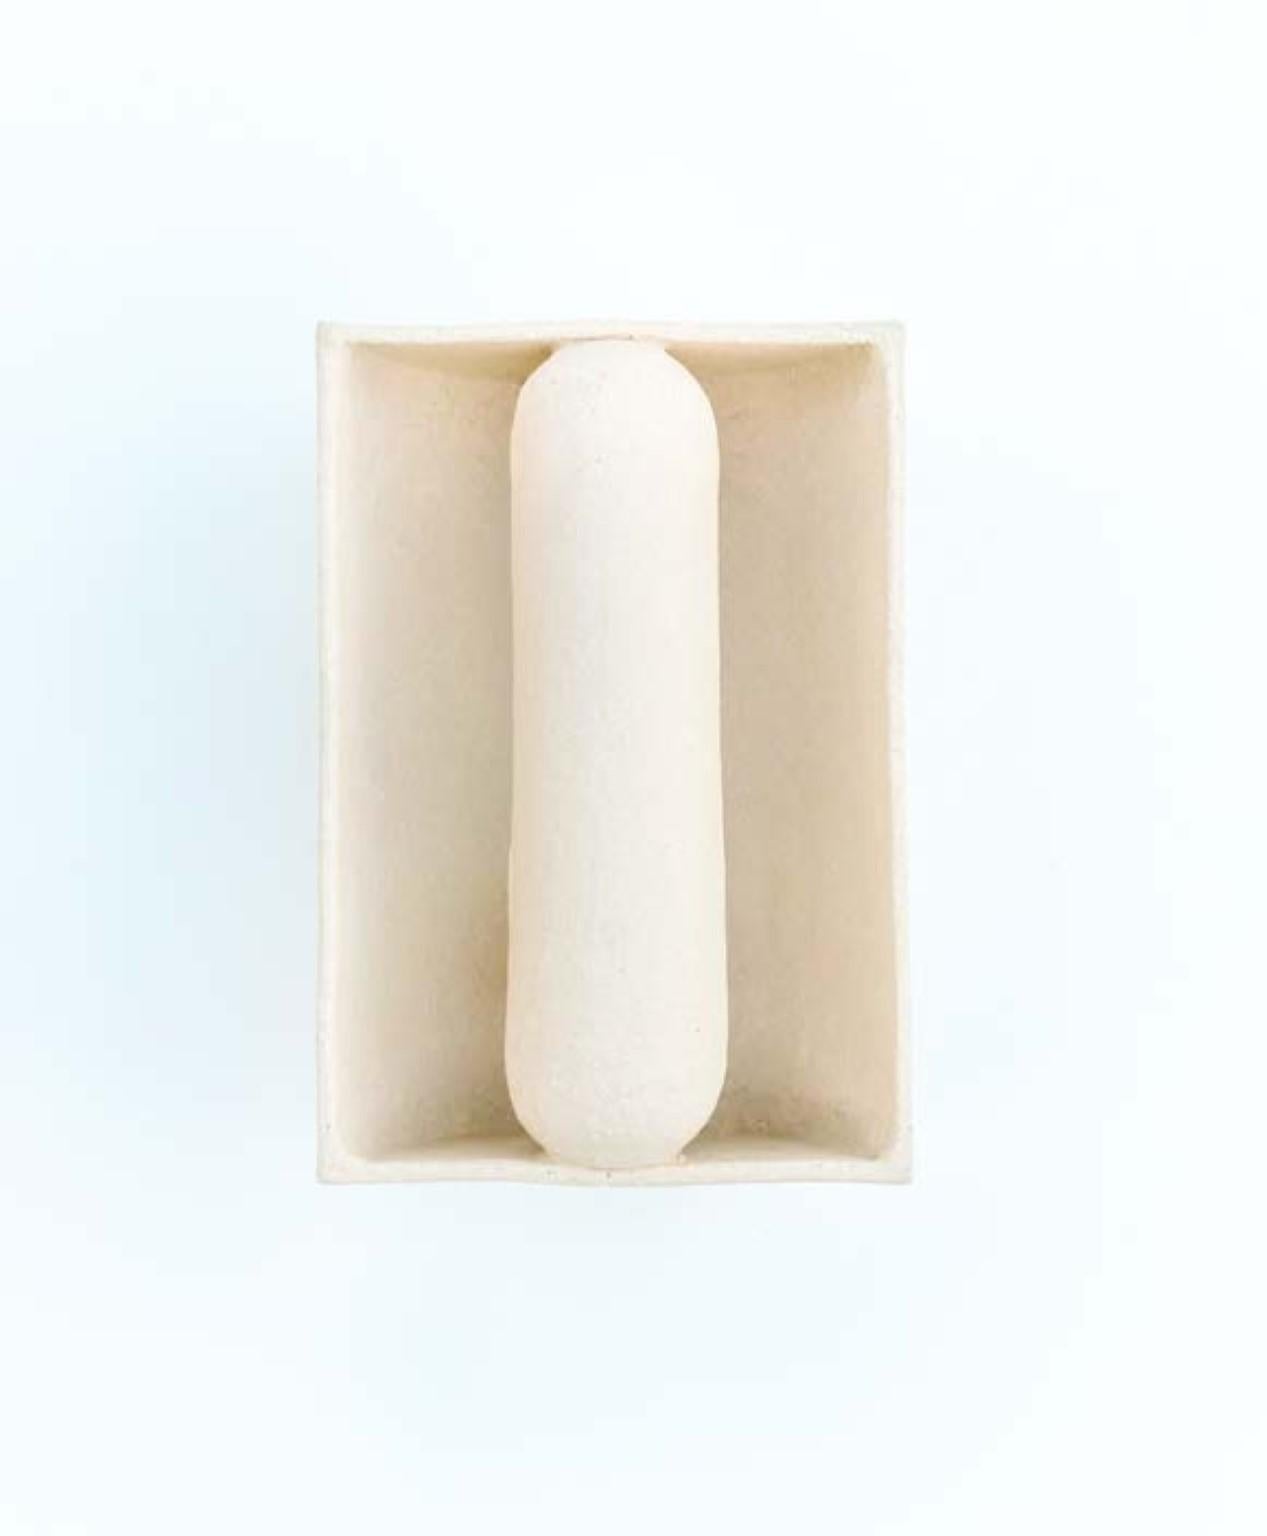 Kyrtos wall light by Lisa Allegra
Dimensions: W 32 x D 14 x H 22 cm
Materials: Clay


Born in 1986 in Paris, Lisa Allegra has earned in 2010 a degree in furniture design from the École Supérieure des Arts Décoratifs. She has worked for Tsé&Tsé